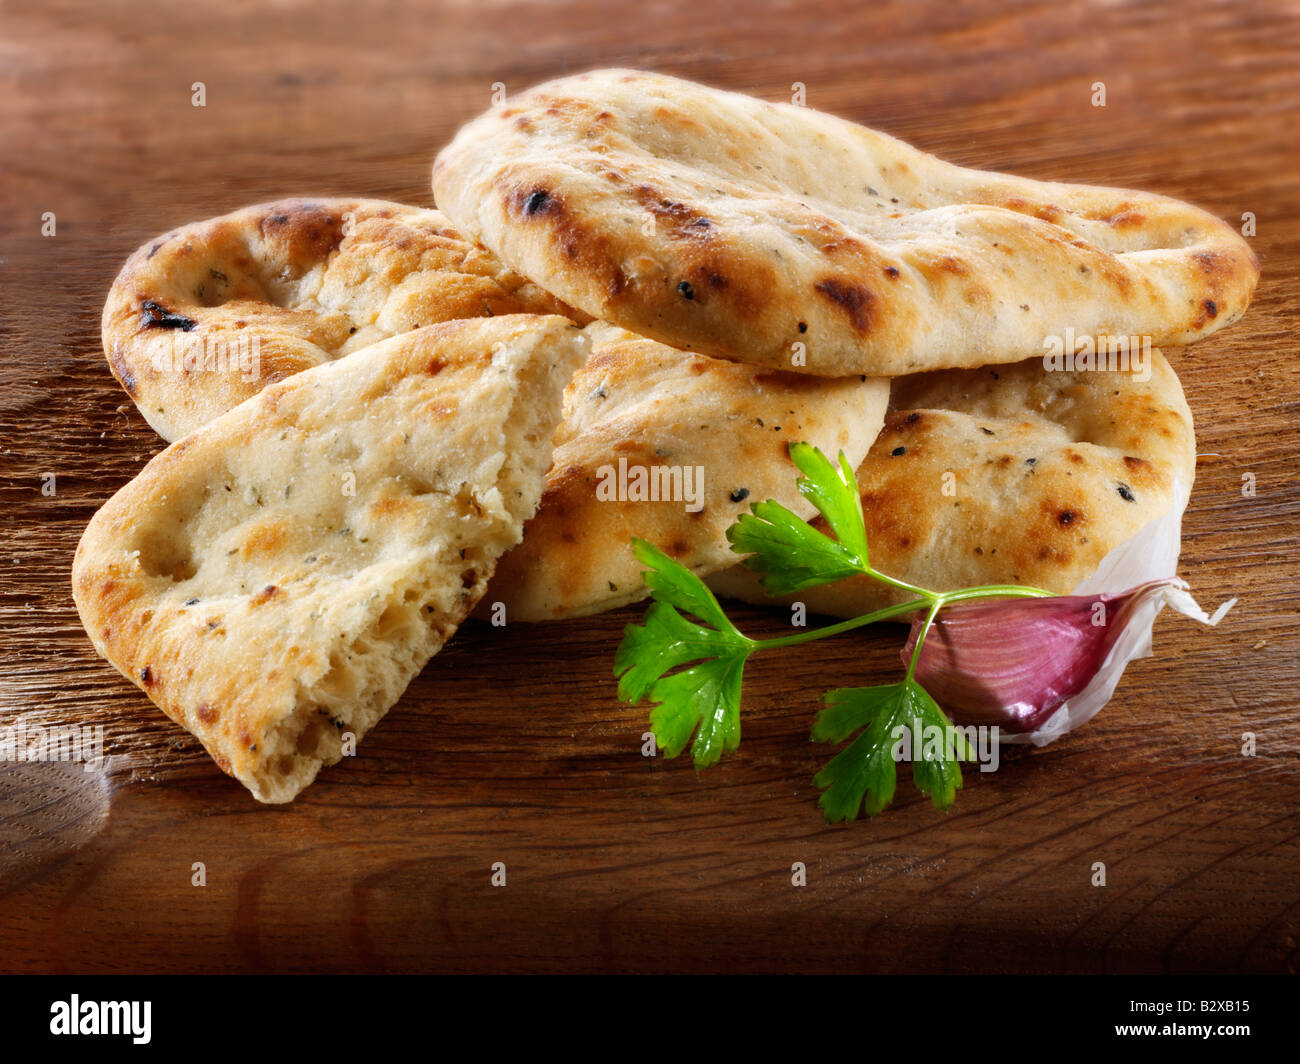 Garlic and coriander Indian Naan Bread served ready to eat Stock Photo